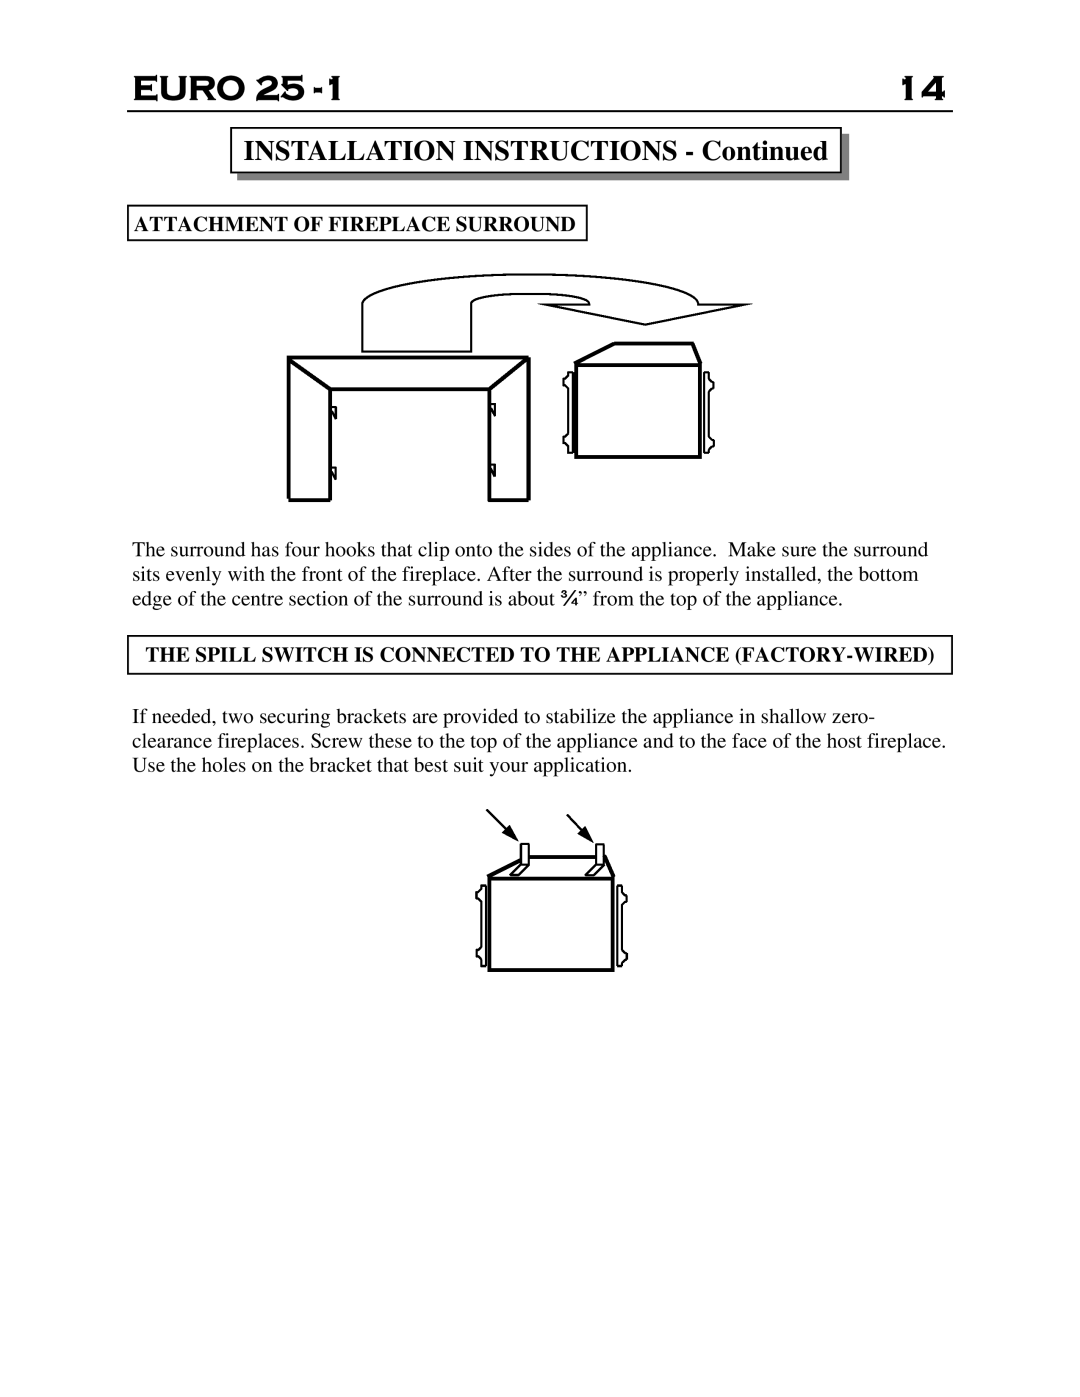 Delkin Devices EI - 25-1 manual Euro, INSTALLATION INSTRUCTIONS - Continued, Attachment Of Fireplace Surround 